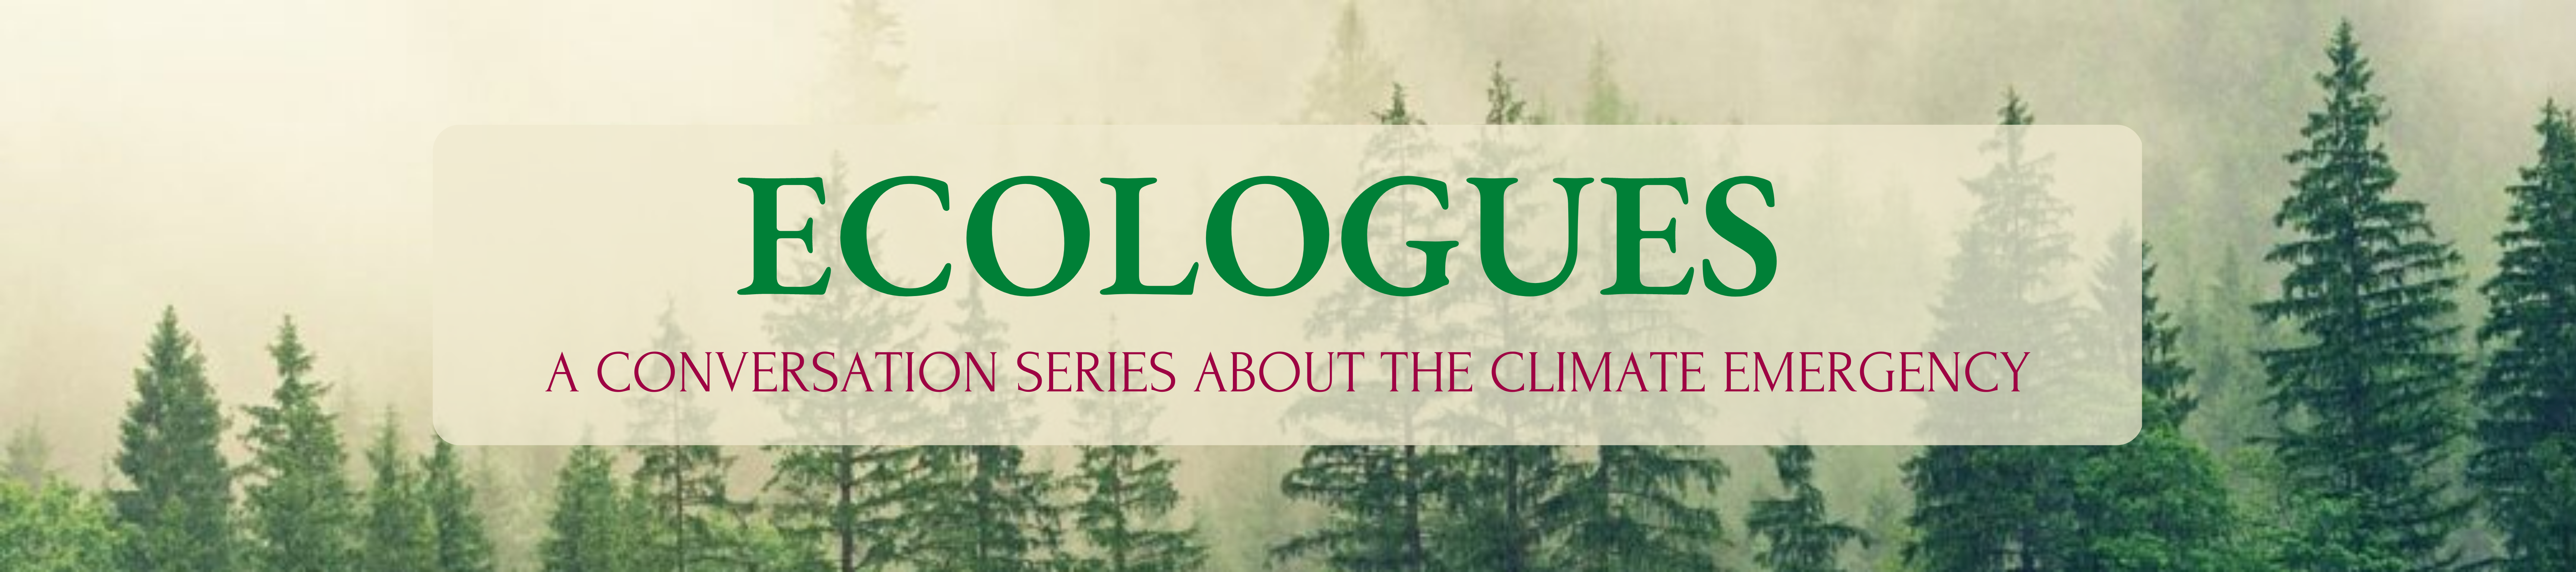 Ecologues Educational Resources banners